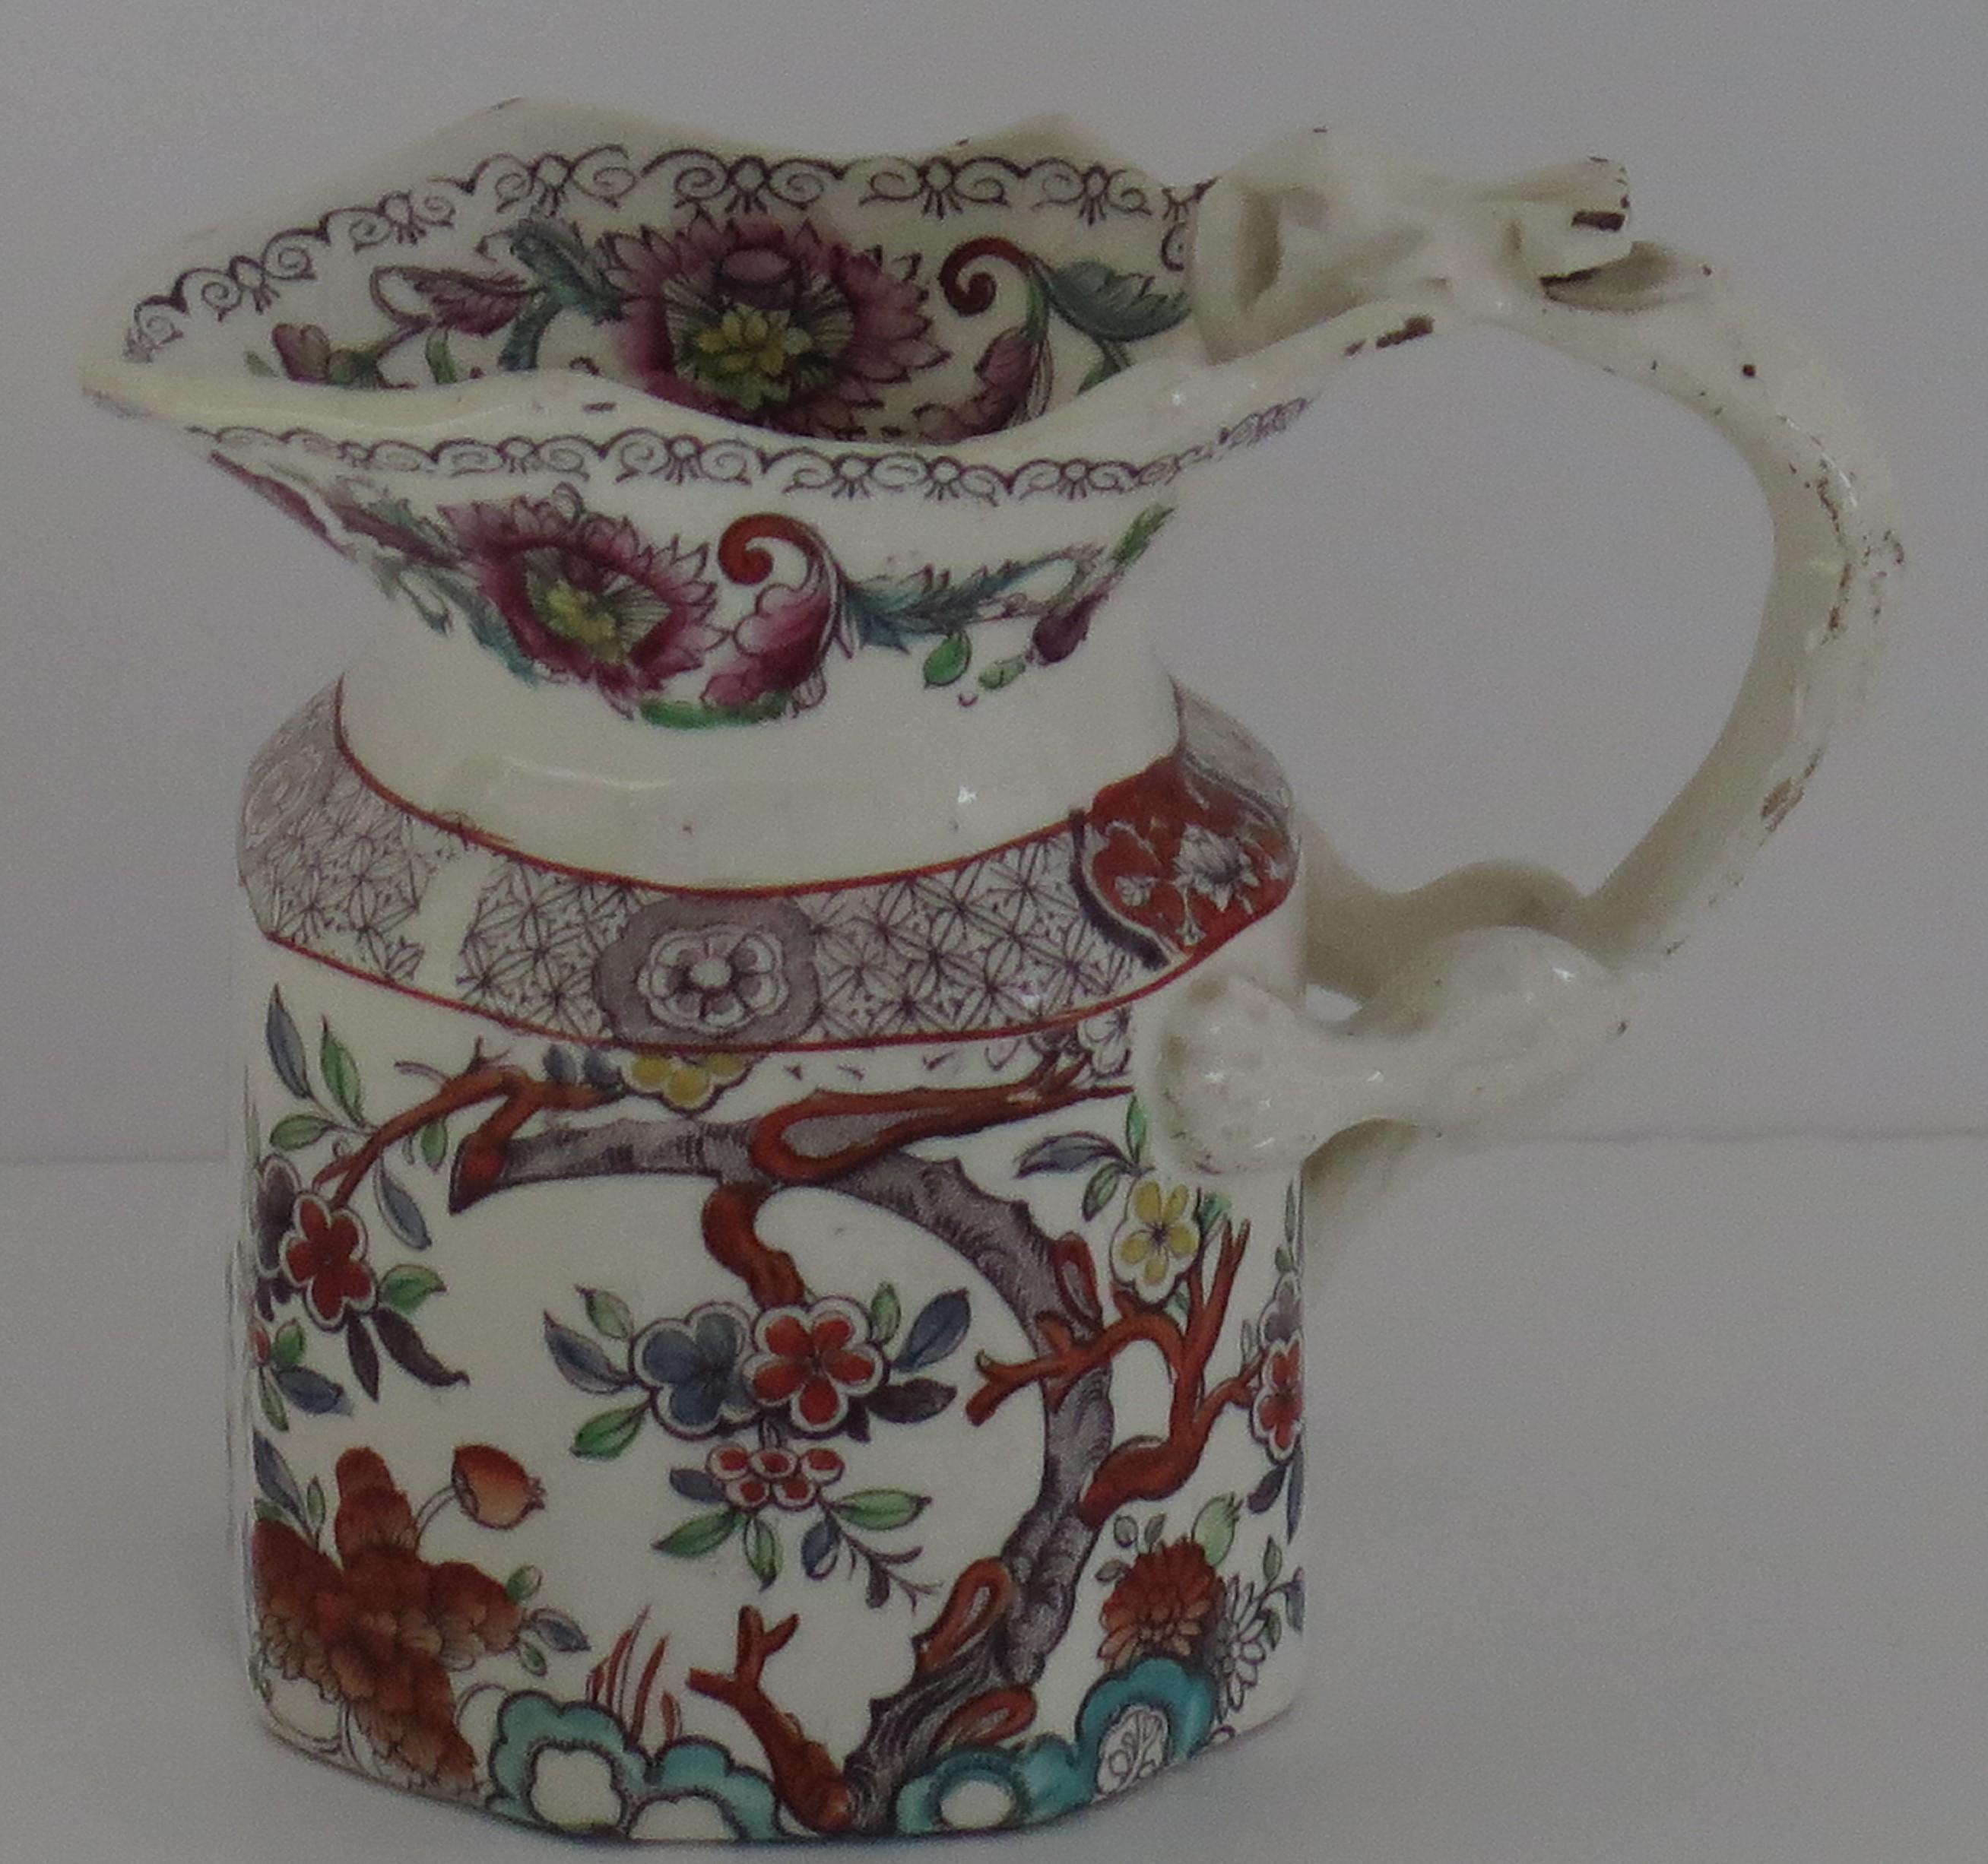 Hand-Painted Rare Mason's Ironstone Fenton Jug or pitcher in Tree Peony Pattern, Circa 1840 For Sale